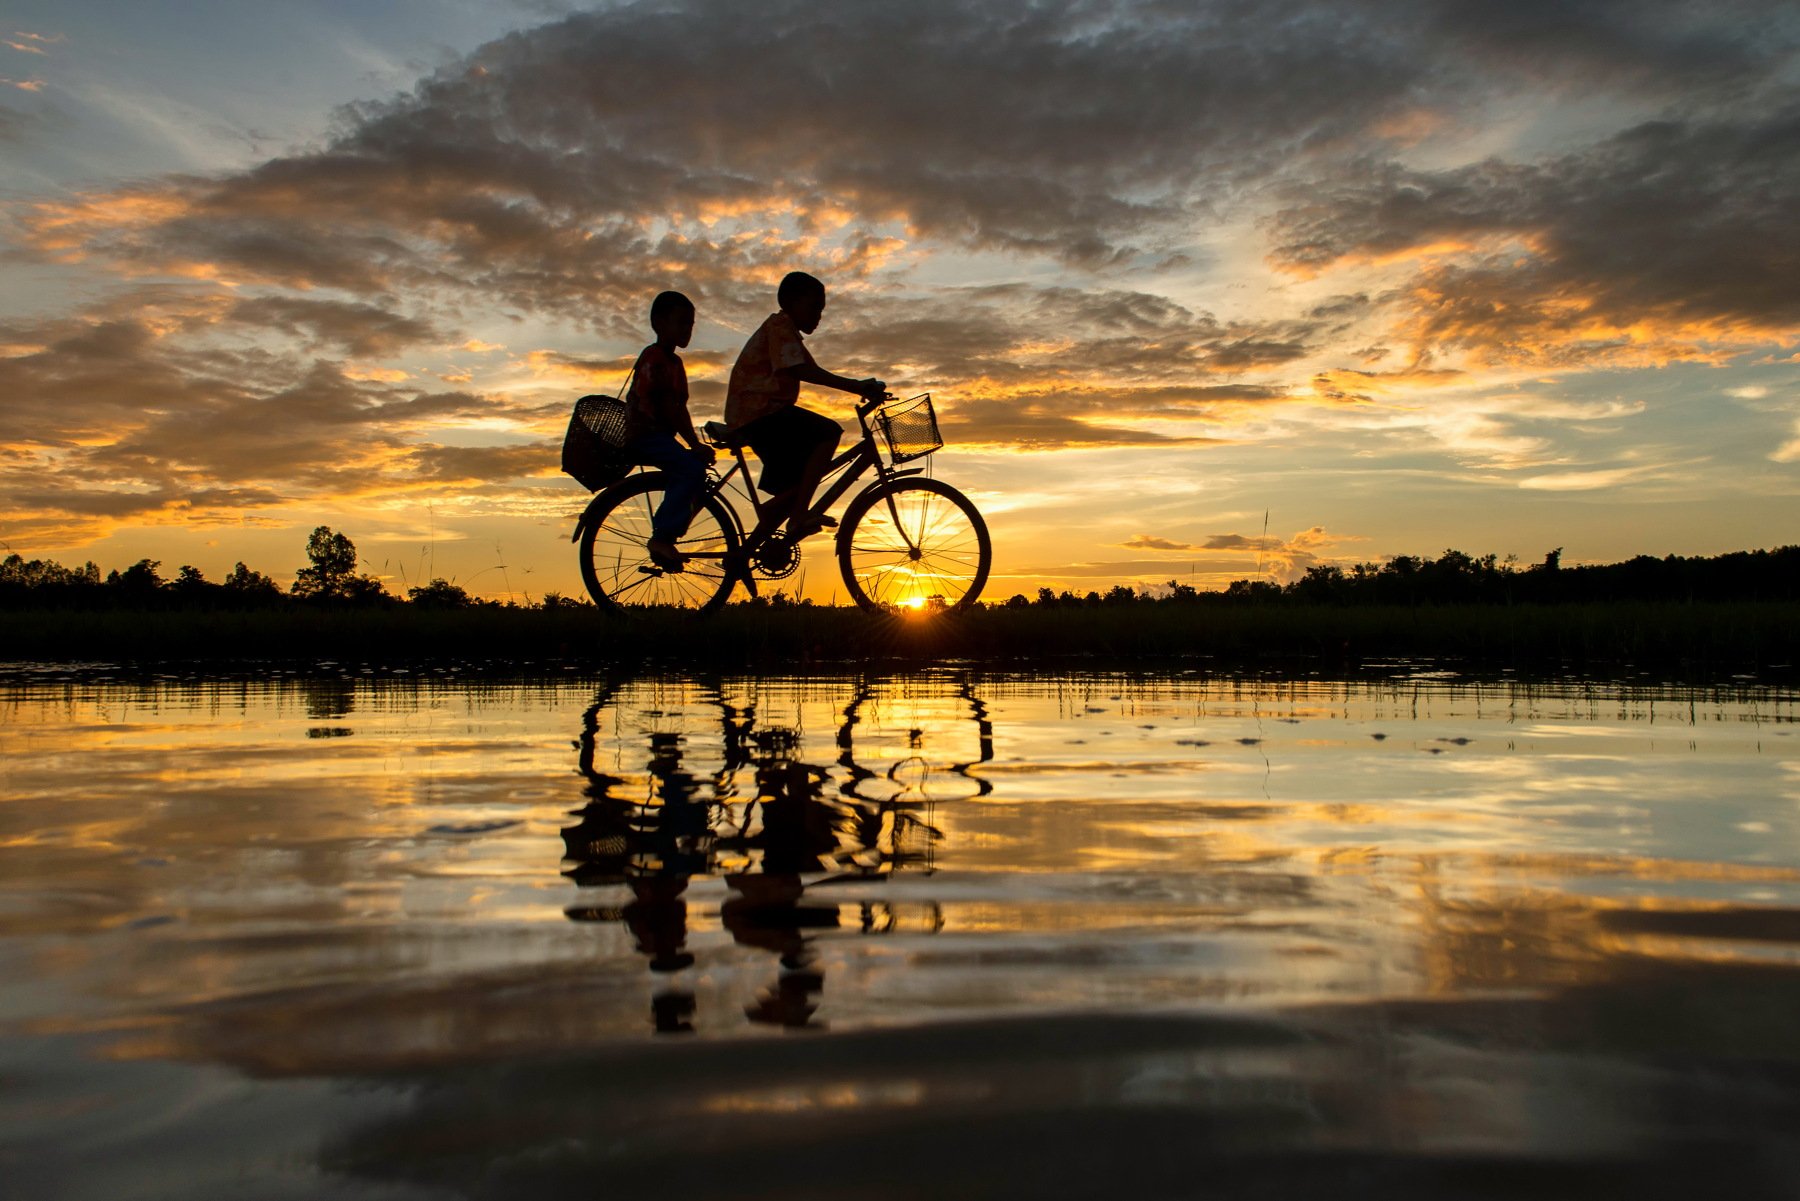 Cycling, Bicycle, Scenics, Sunset, Reflection, Lake, People, Two People, Nature, Silhouette, Thailand, Atmospheric Mood, Beauty In Nature, Cloud - Sky, Color Image, Horizontal, On The Move, Outdoors, Photography, Sky, Sunlight, Togetherness, Transportatio, sarawut intarob